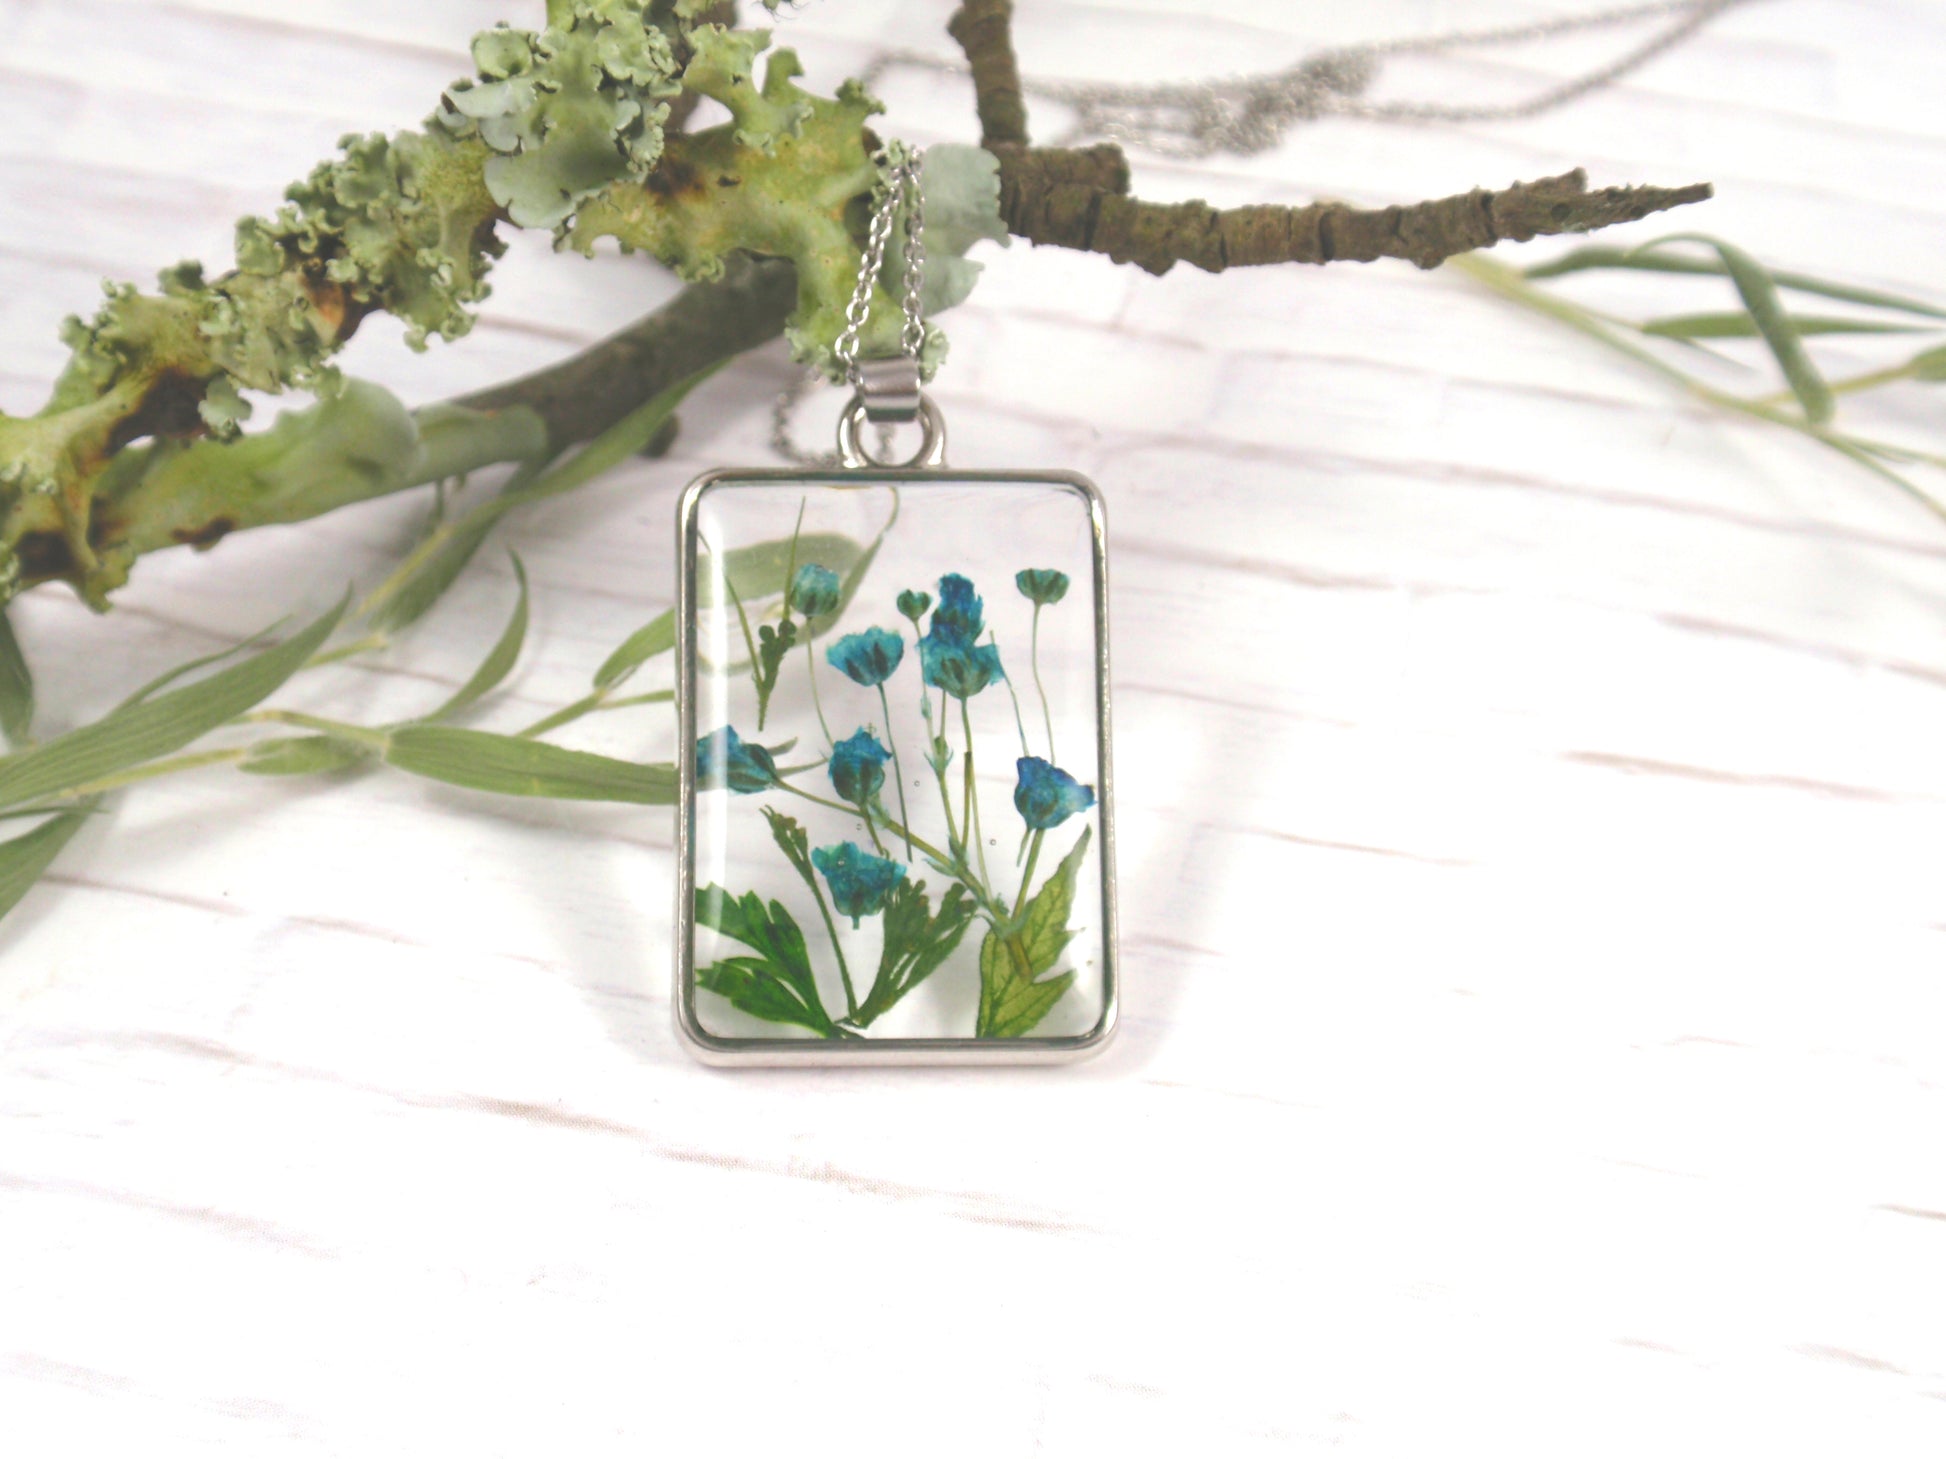 Handmade jewelry with real flowers